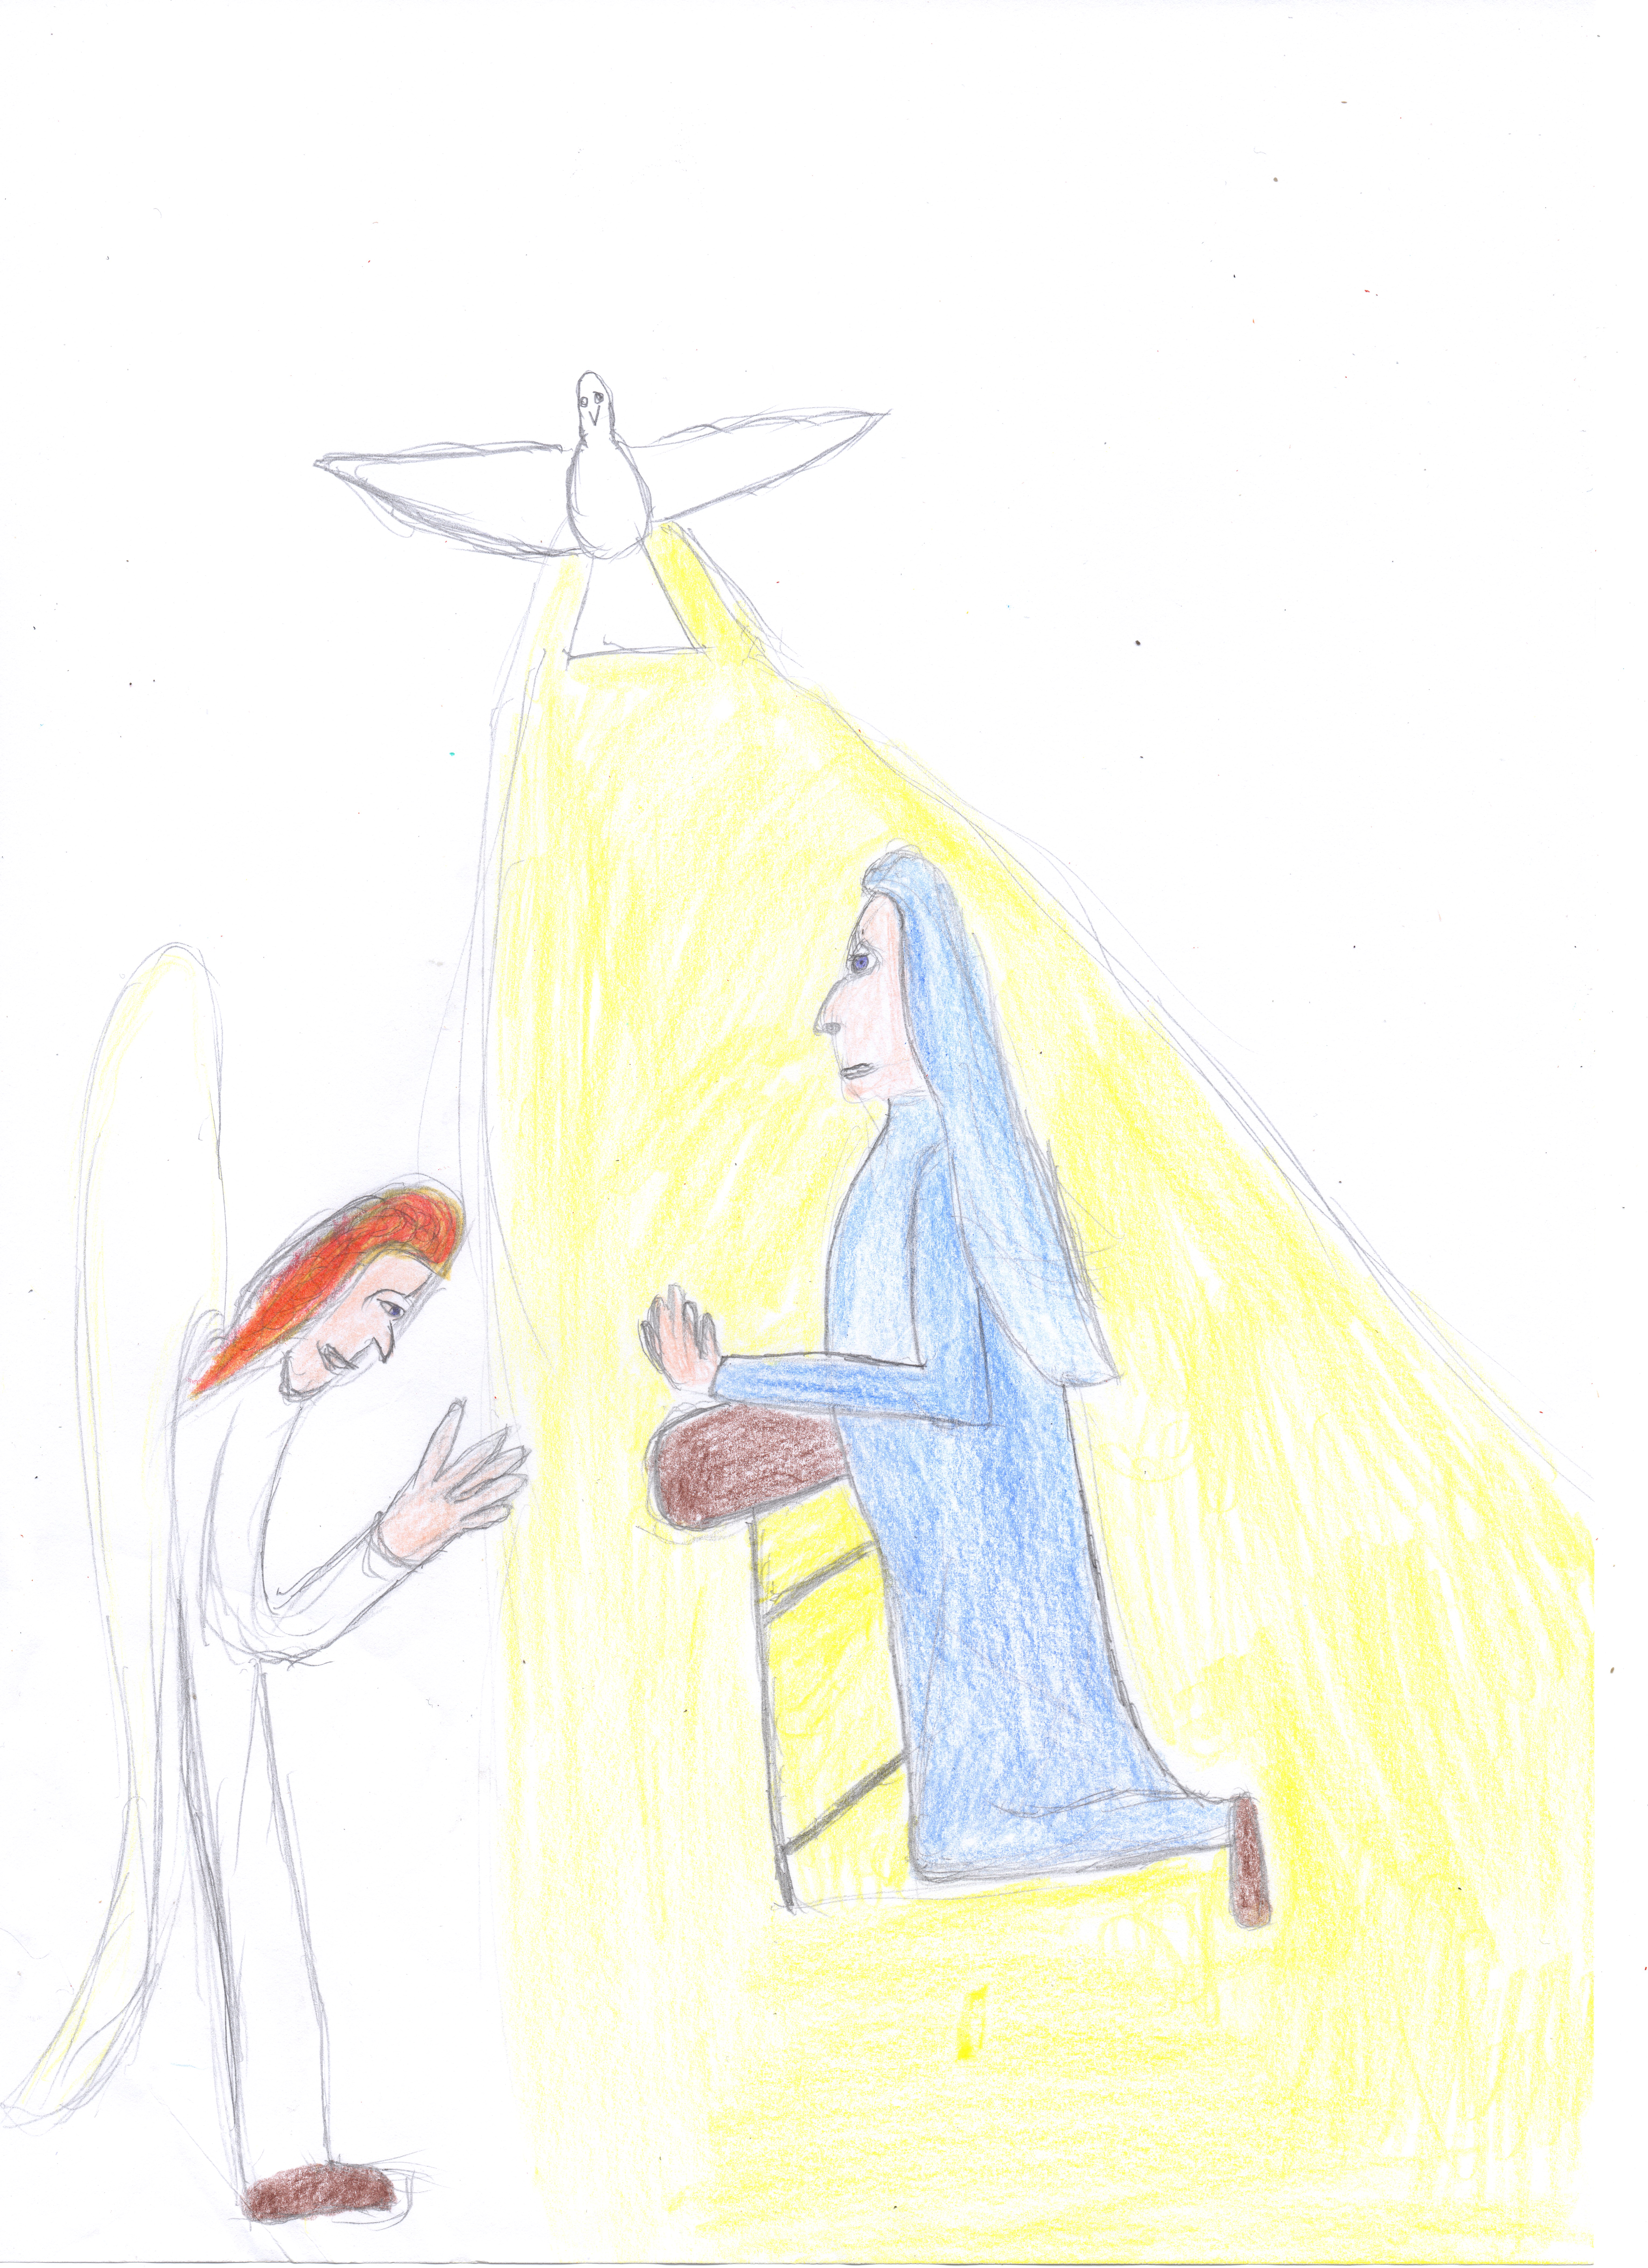 A rough pencil drawing of the anunciation that I, Ciaran Aodh Mac Ardghail drew some time ago. Depicted is the Angel Gabriel greeting Mary. Mary is at prayer, and the Holy Ghost, in the form of a dove, overshadows her, in the form of a dove.